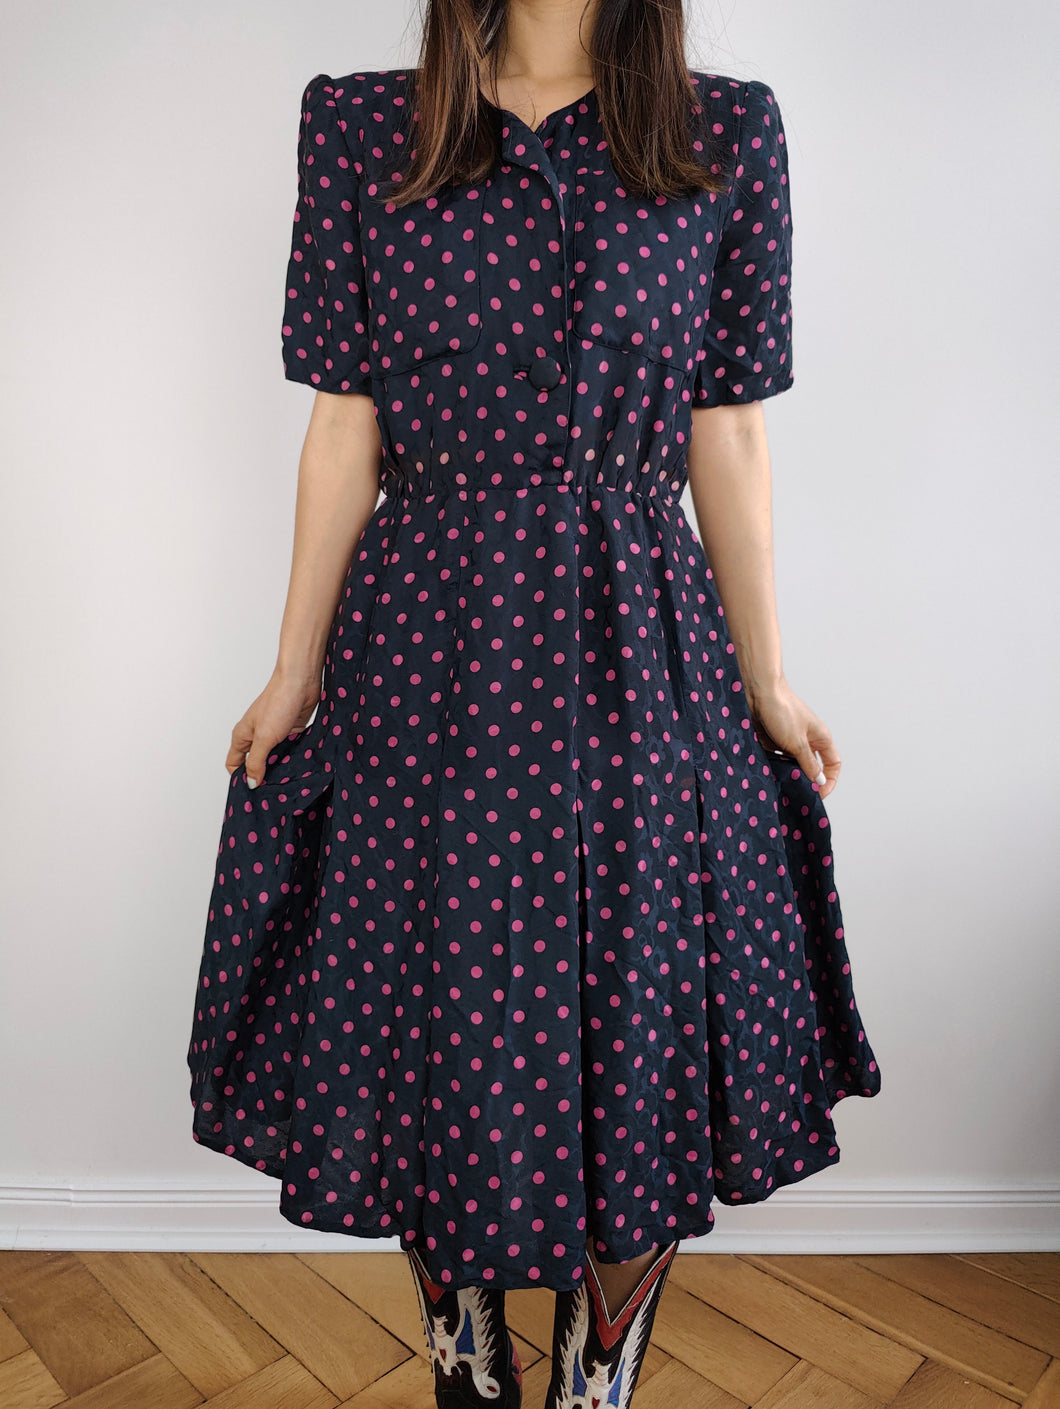 The Blue Pink Polka Dot Pattern Dress | Vintage Marcello Corazessi made in Italy navy pink dots print midi dress S